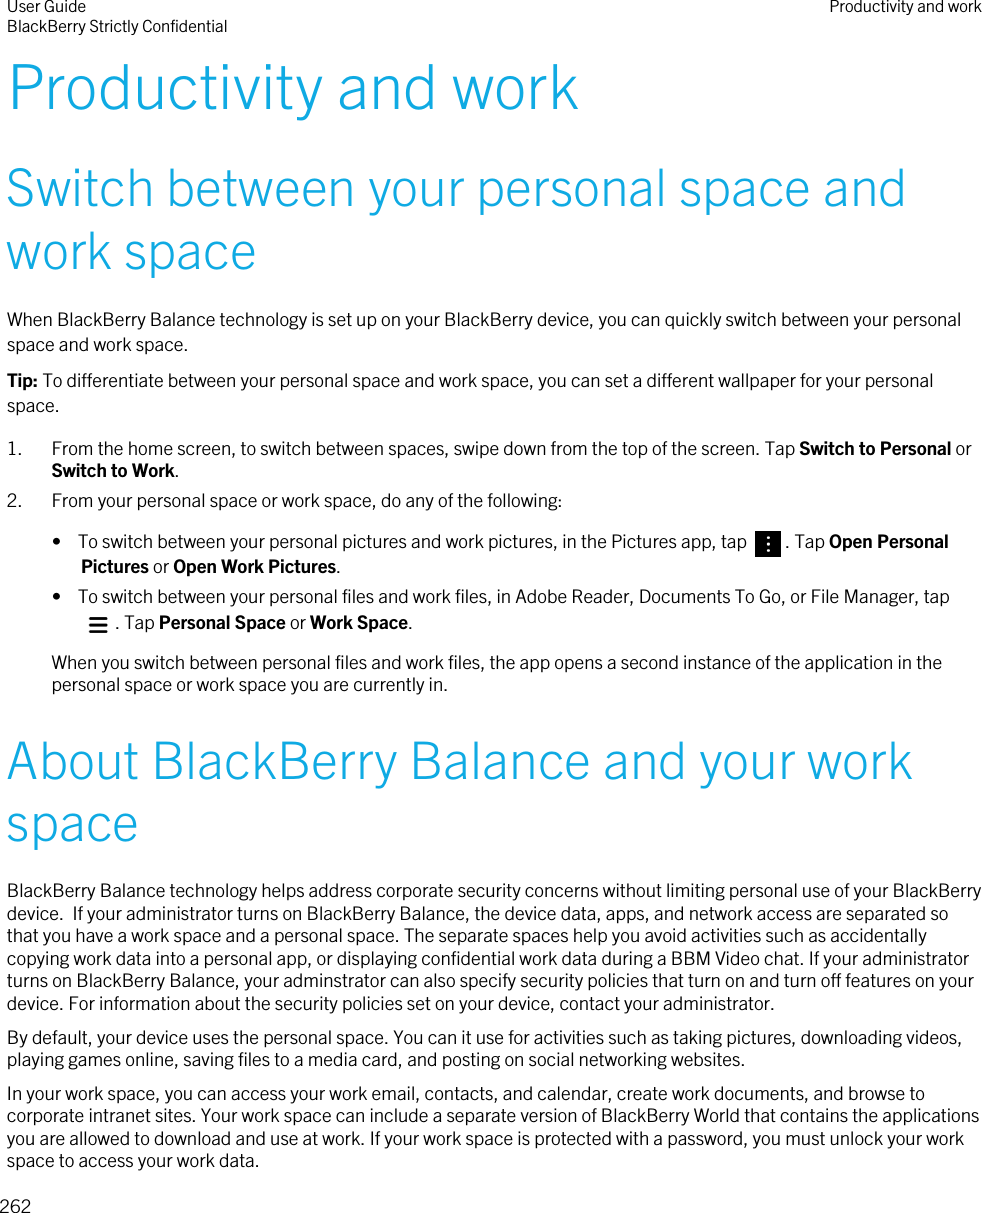 Productivity and workSwitch between your personal space and work spaceWhen BlackBerry Balance technology is set up on your BlackBerry device, you can quickly switch between your personal space and work space.Tip: To differentiate between your personal space and work space, you can set a different wallpaper for your personal space.1. From the home screen, to switch between spaces, swipe down from the top of the screen. Tap Switch to Personal or Switch to Work.2. From your personal space or work space, do any of the following:•  To switch between your personal pictures and work pictures, in the Pictures app, tap  . Tap Open Personal Pictures or Open Work Pictures.•  To switch between your personal files and work files, in Adobe Reader, Documents To Go, or File Manager, tap . Tap Personal Space or Work Space.When you switch between personal files and work files, the app opens a second instance of the application in the personal space or work space you are currently in.About BlackBerry Balance and your work spaceBlackBerry Balance technology helps address corporate security concerns without limiting personal use of your BlackBerry device.  If your administrator turns on BlackBerry Balance, the device data, apps, and network access are separated so that you have a work space and a personal space. The separate spaces help you avoid activities such as accidentally copying work data into a personal app, or displaying confidential work data during a BBM Video chat. If your administrator turns on BlackBerry Balance, your adminstrator can also specify security policies that turn on and turn off features on your device. For information about the security policies set on your device, contact your administrator.By default, your device uses the personal space. You can it use for activities such as taking pictures, downloading videos, playing games online, saving files to a media card, and posting on social networking websites.In your work space, you can access your work email, contacts, and calendar, create work documents, and browse to corporate intranet sites. Your work space can include a separate version of BlackBerry World that contains the applications you are allowed to download and use at work. If your work space is protected with a password, you must unlock your work space to access your work data.User GuideBlackBerry Strictly Confidential Productivity and work262